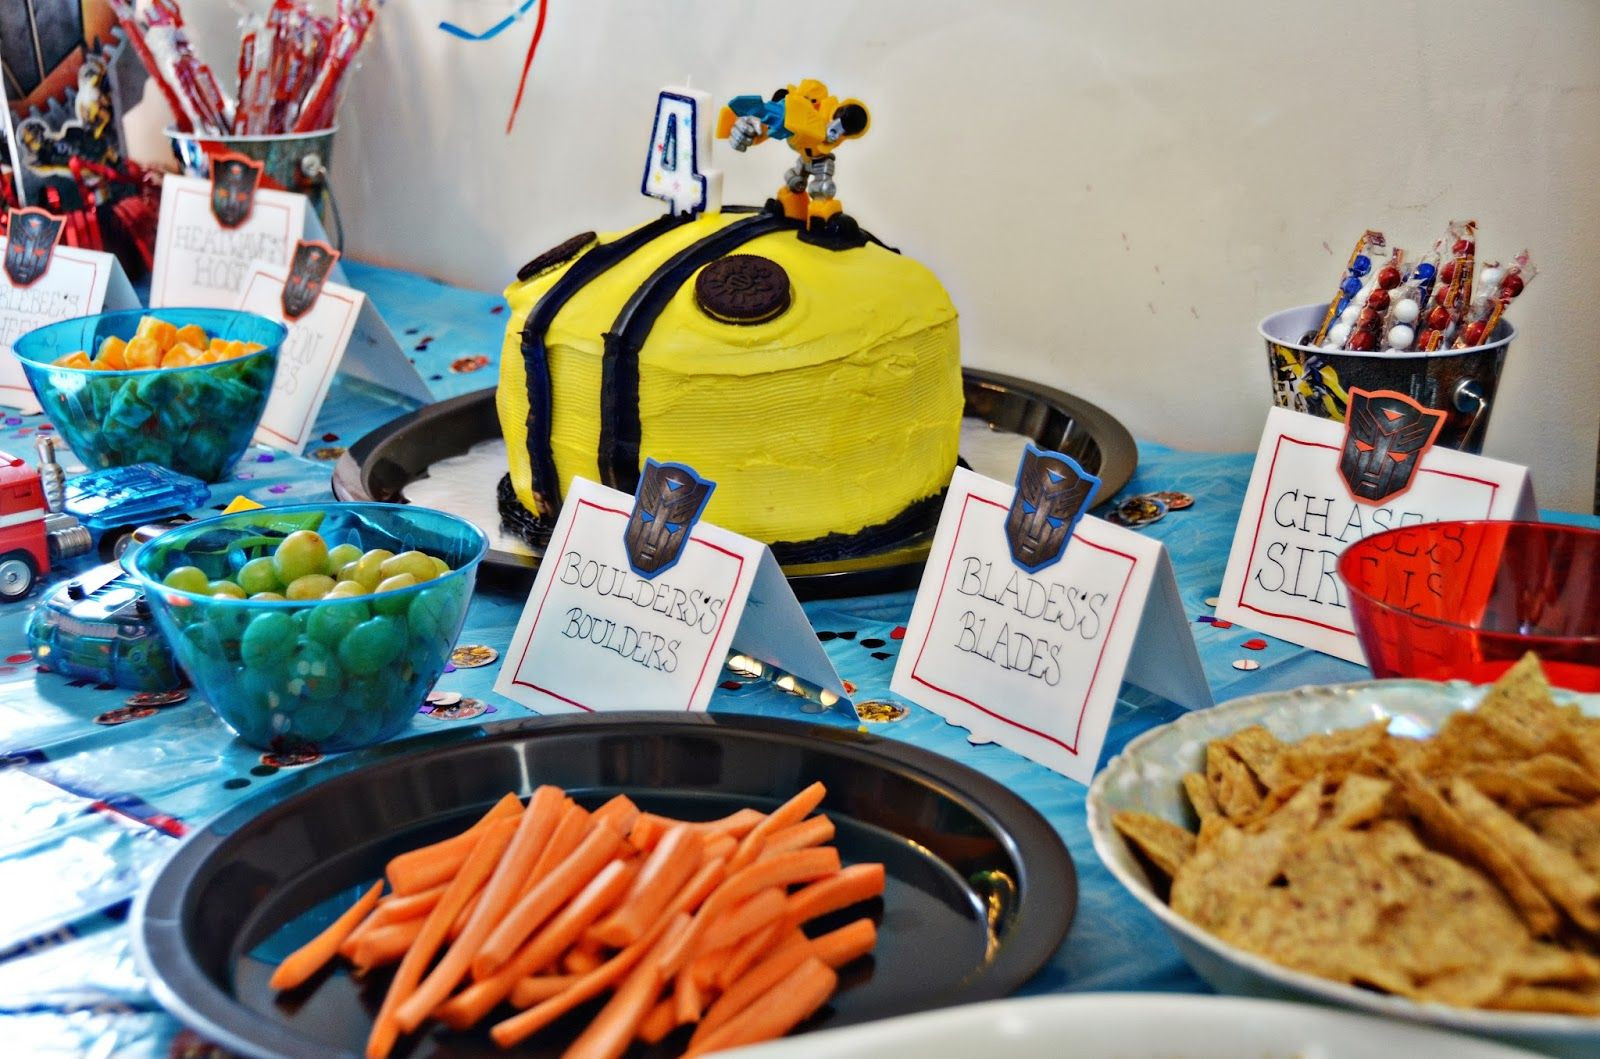 Transformer Party Food Ideas
 Rescue Bot Birthday Party Ideas